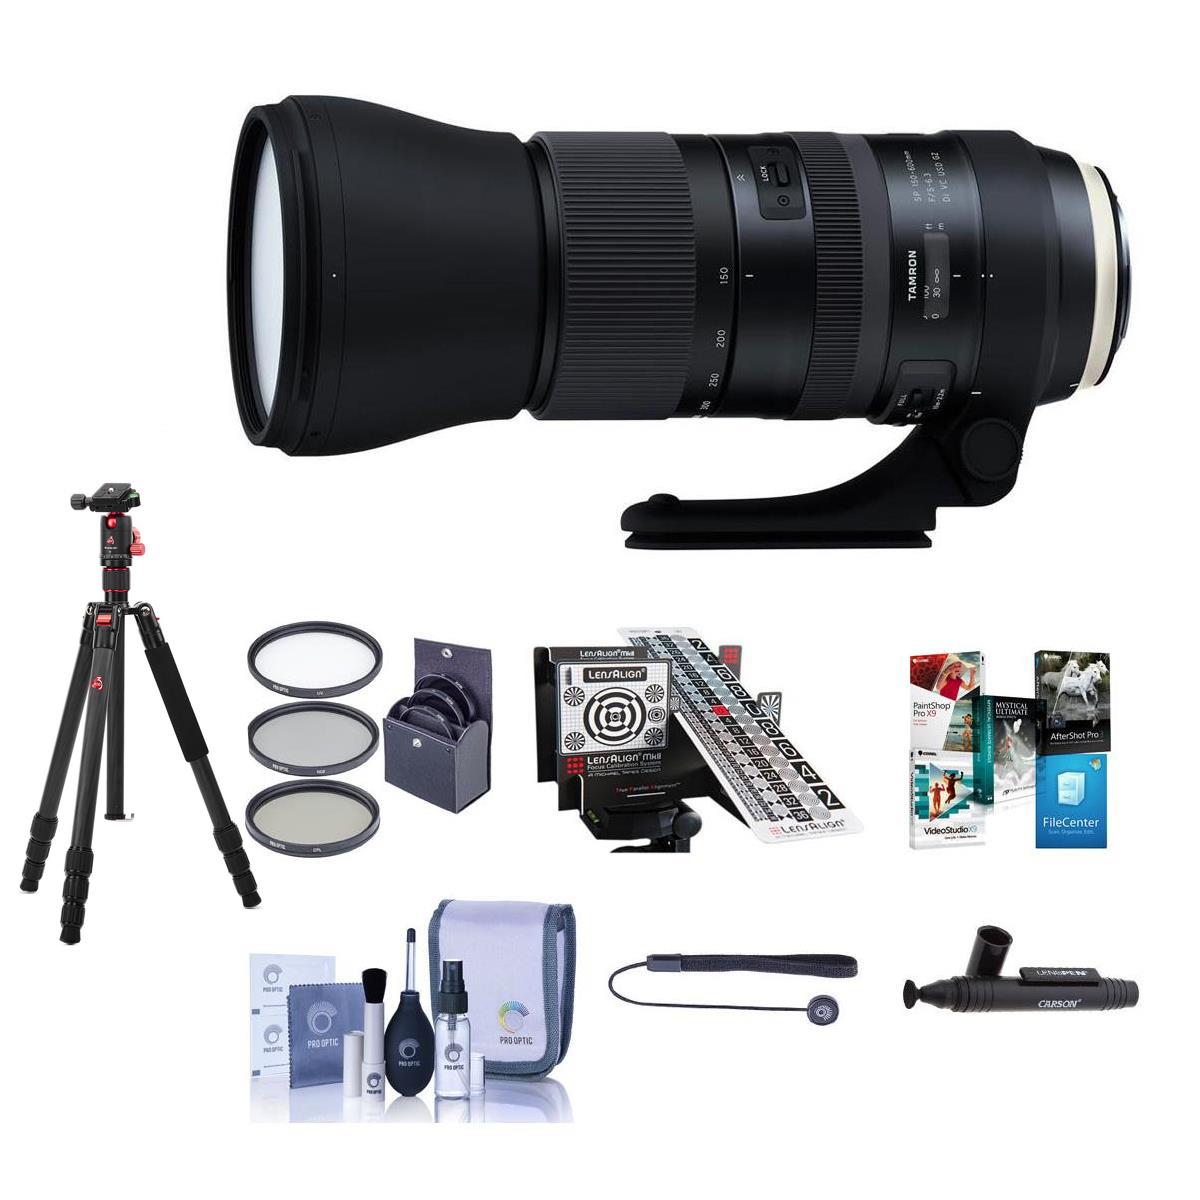 

Tamron SP 150-600mm f/5-6.3 Di VC USD G2 Lens for Canon EF with Premium Acc Kit